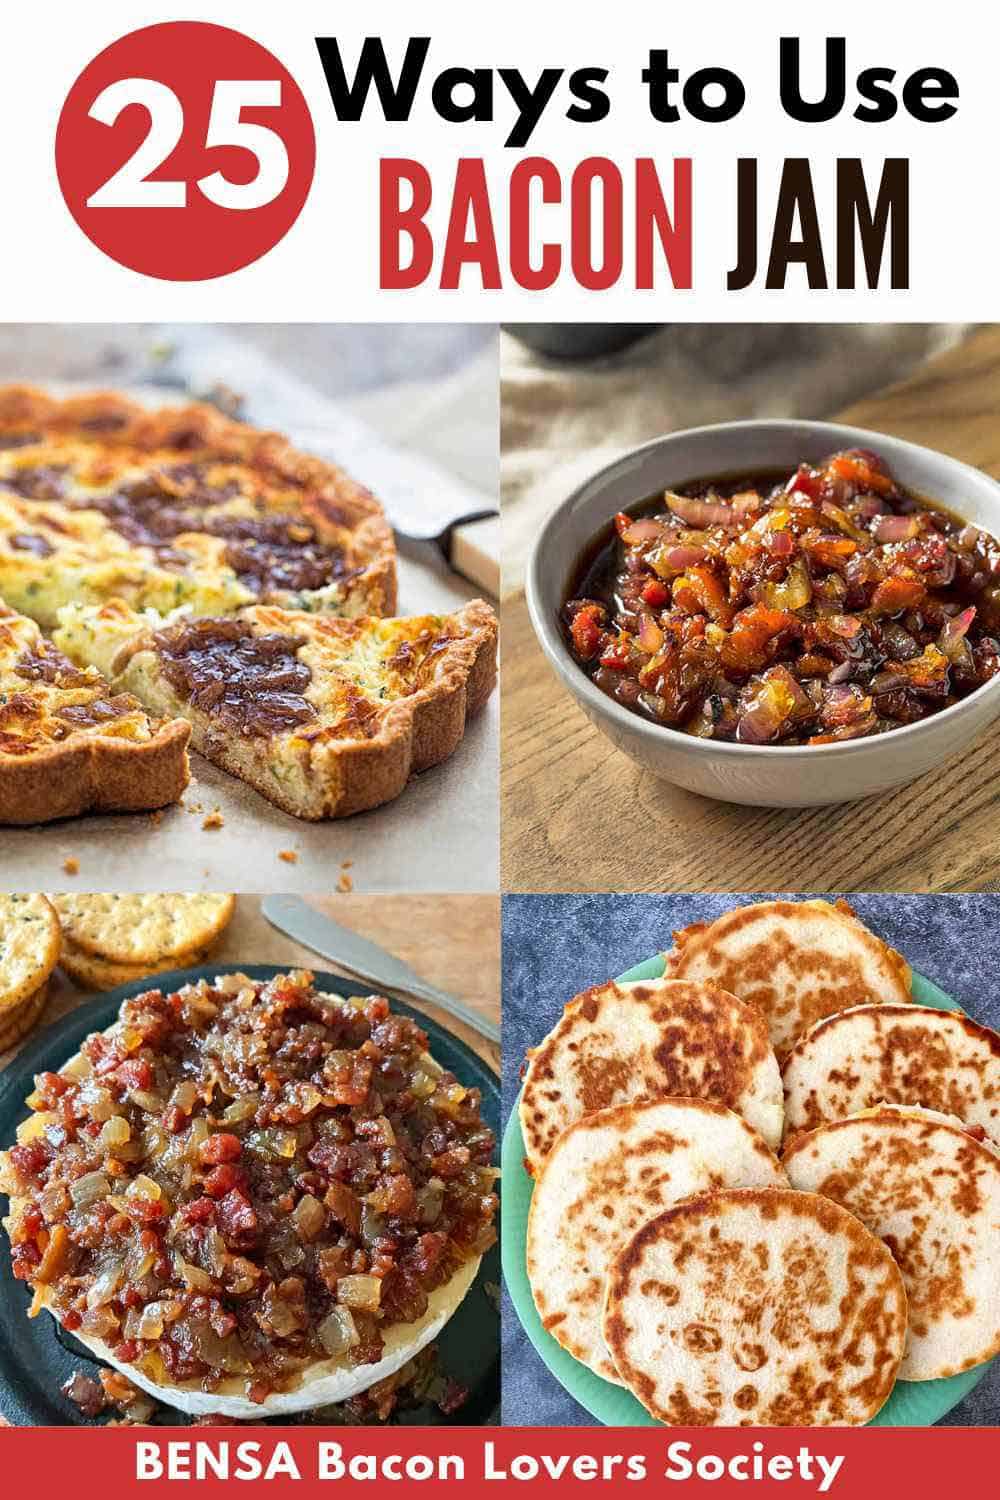 A quiche with bacon jam, a bowl of bacon jam, cheese board and quesadillas.